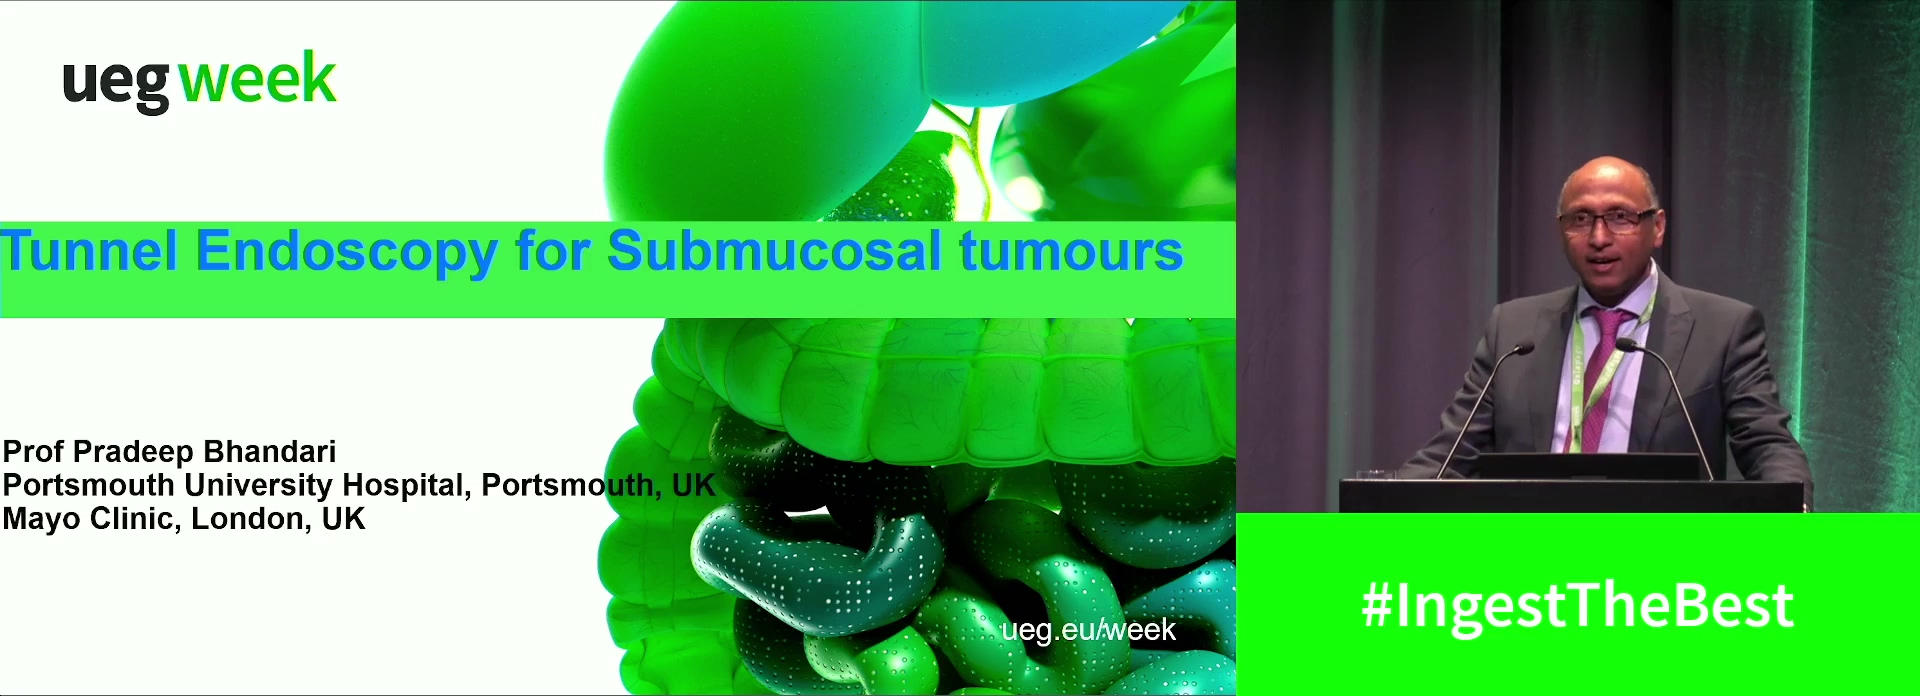 Tunnel endoscopy for submucosal tumours